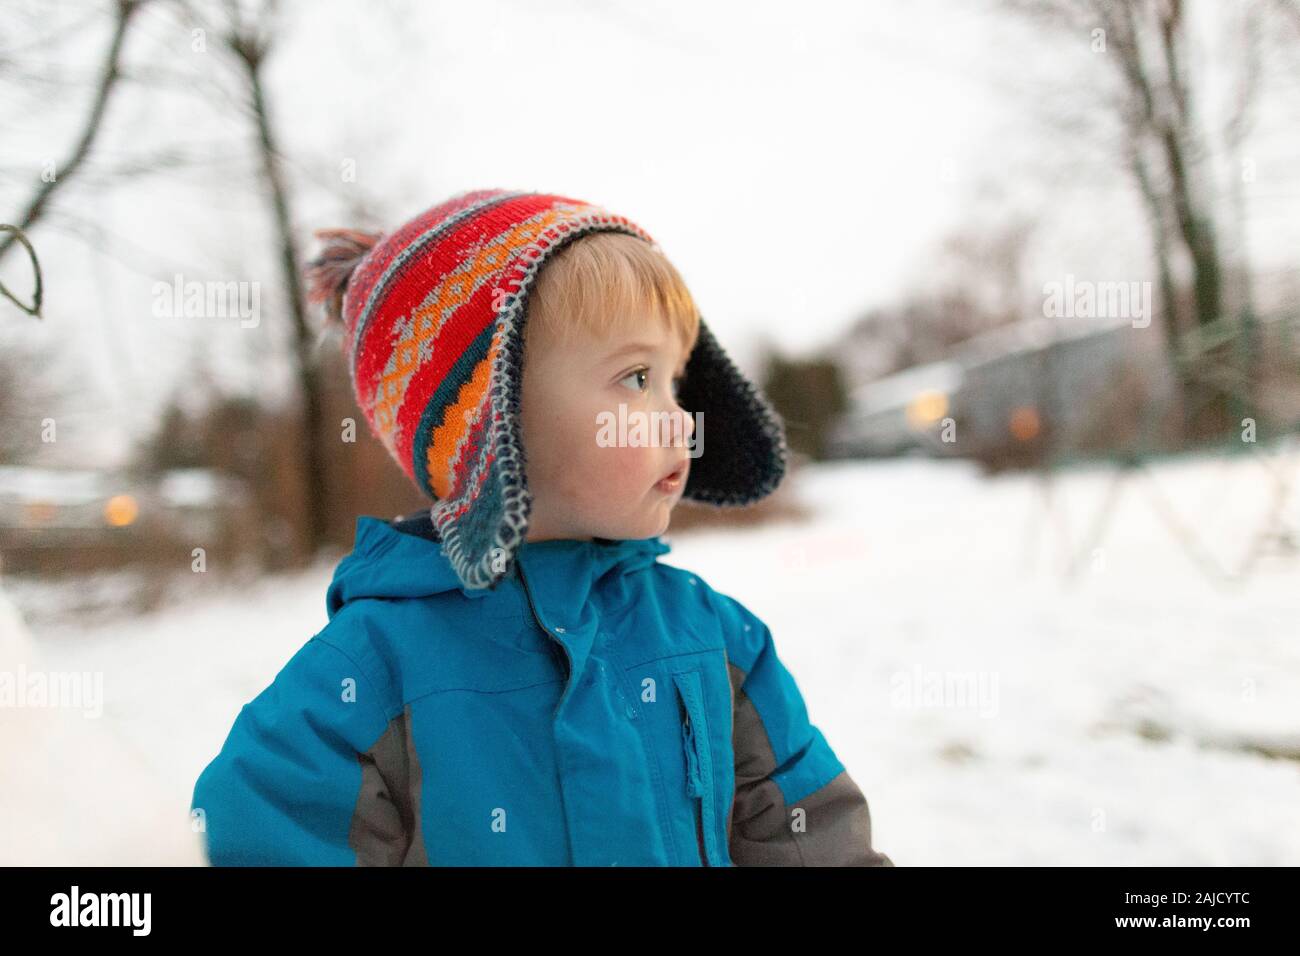 Side view portrait of toddler boy wearing knit hat outdoors in snow Stock Photo